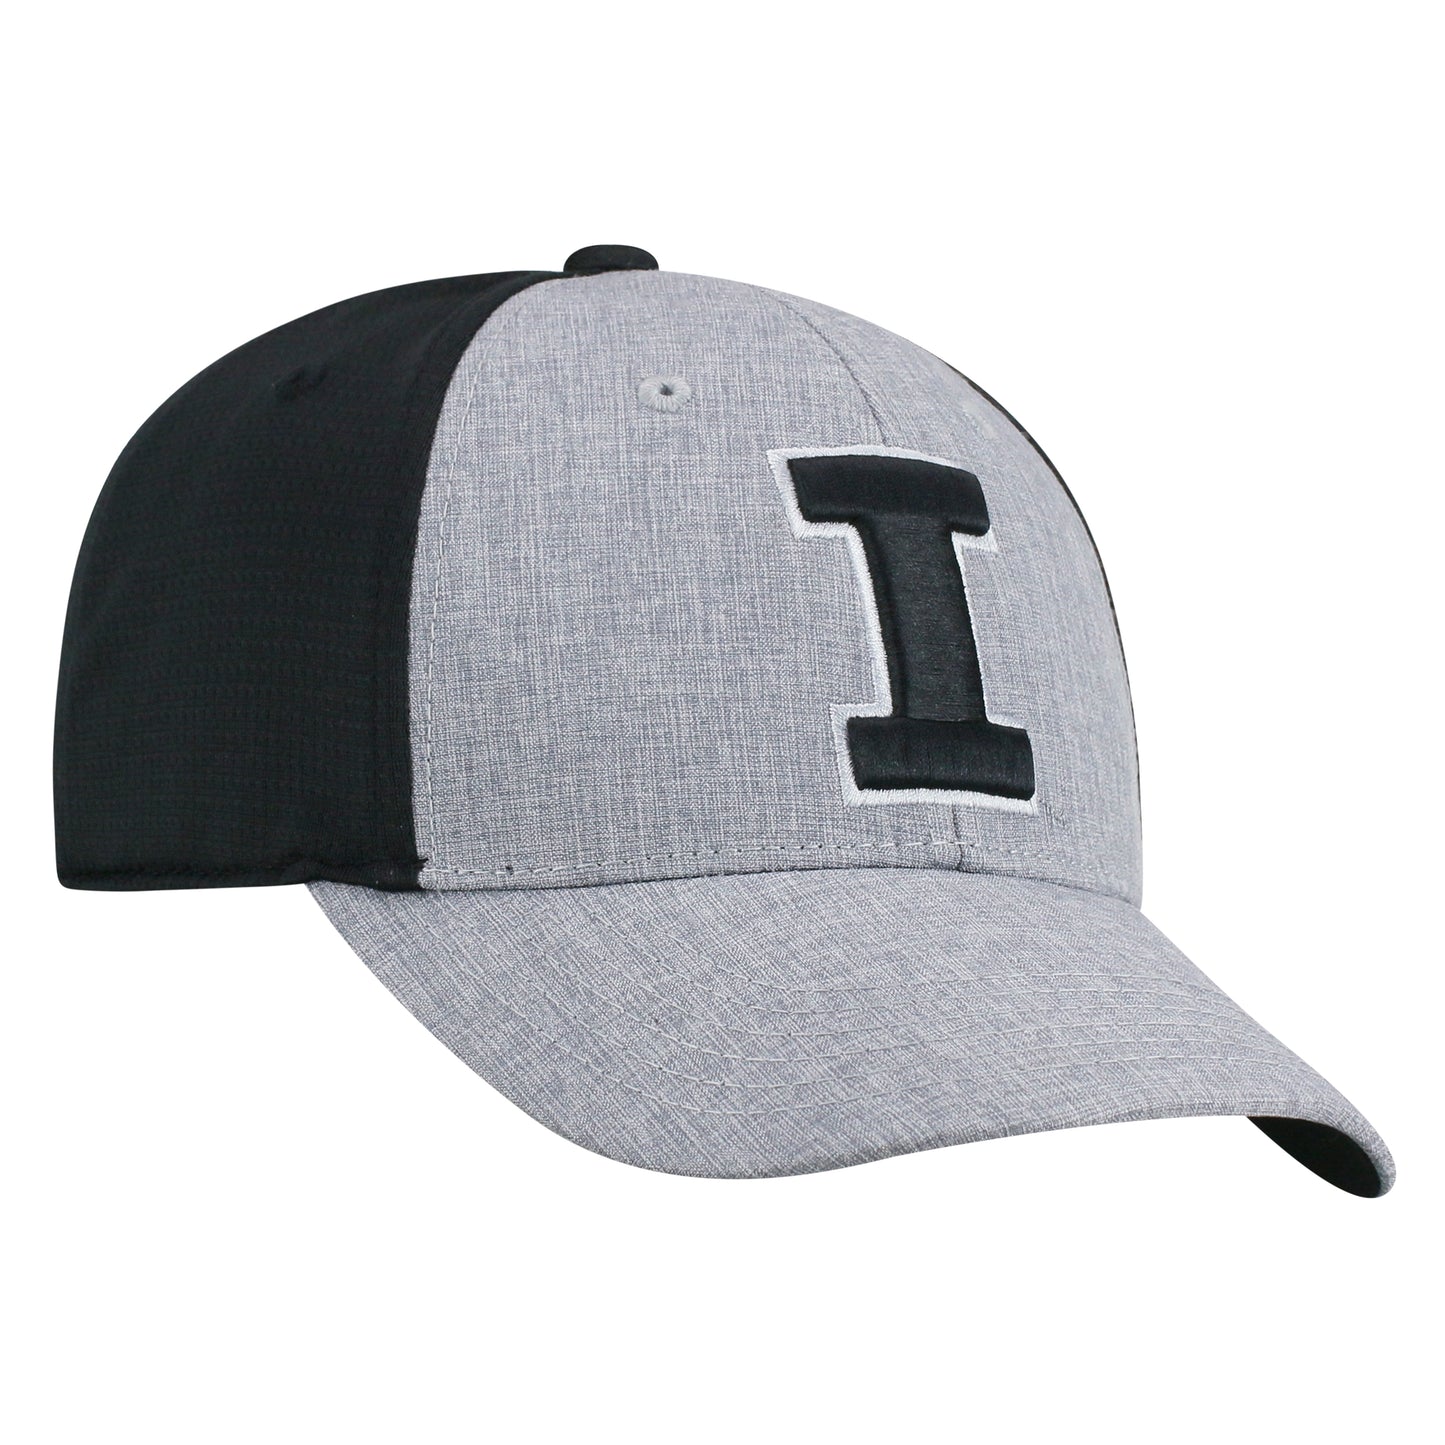 Mens Illinois Fighting Illini Fabooia One Fit Flex Fit Hat By Top Of The World